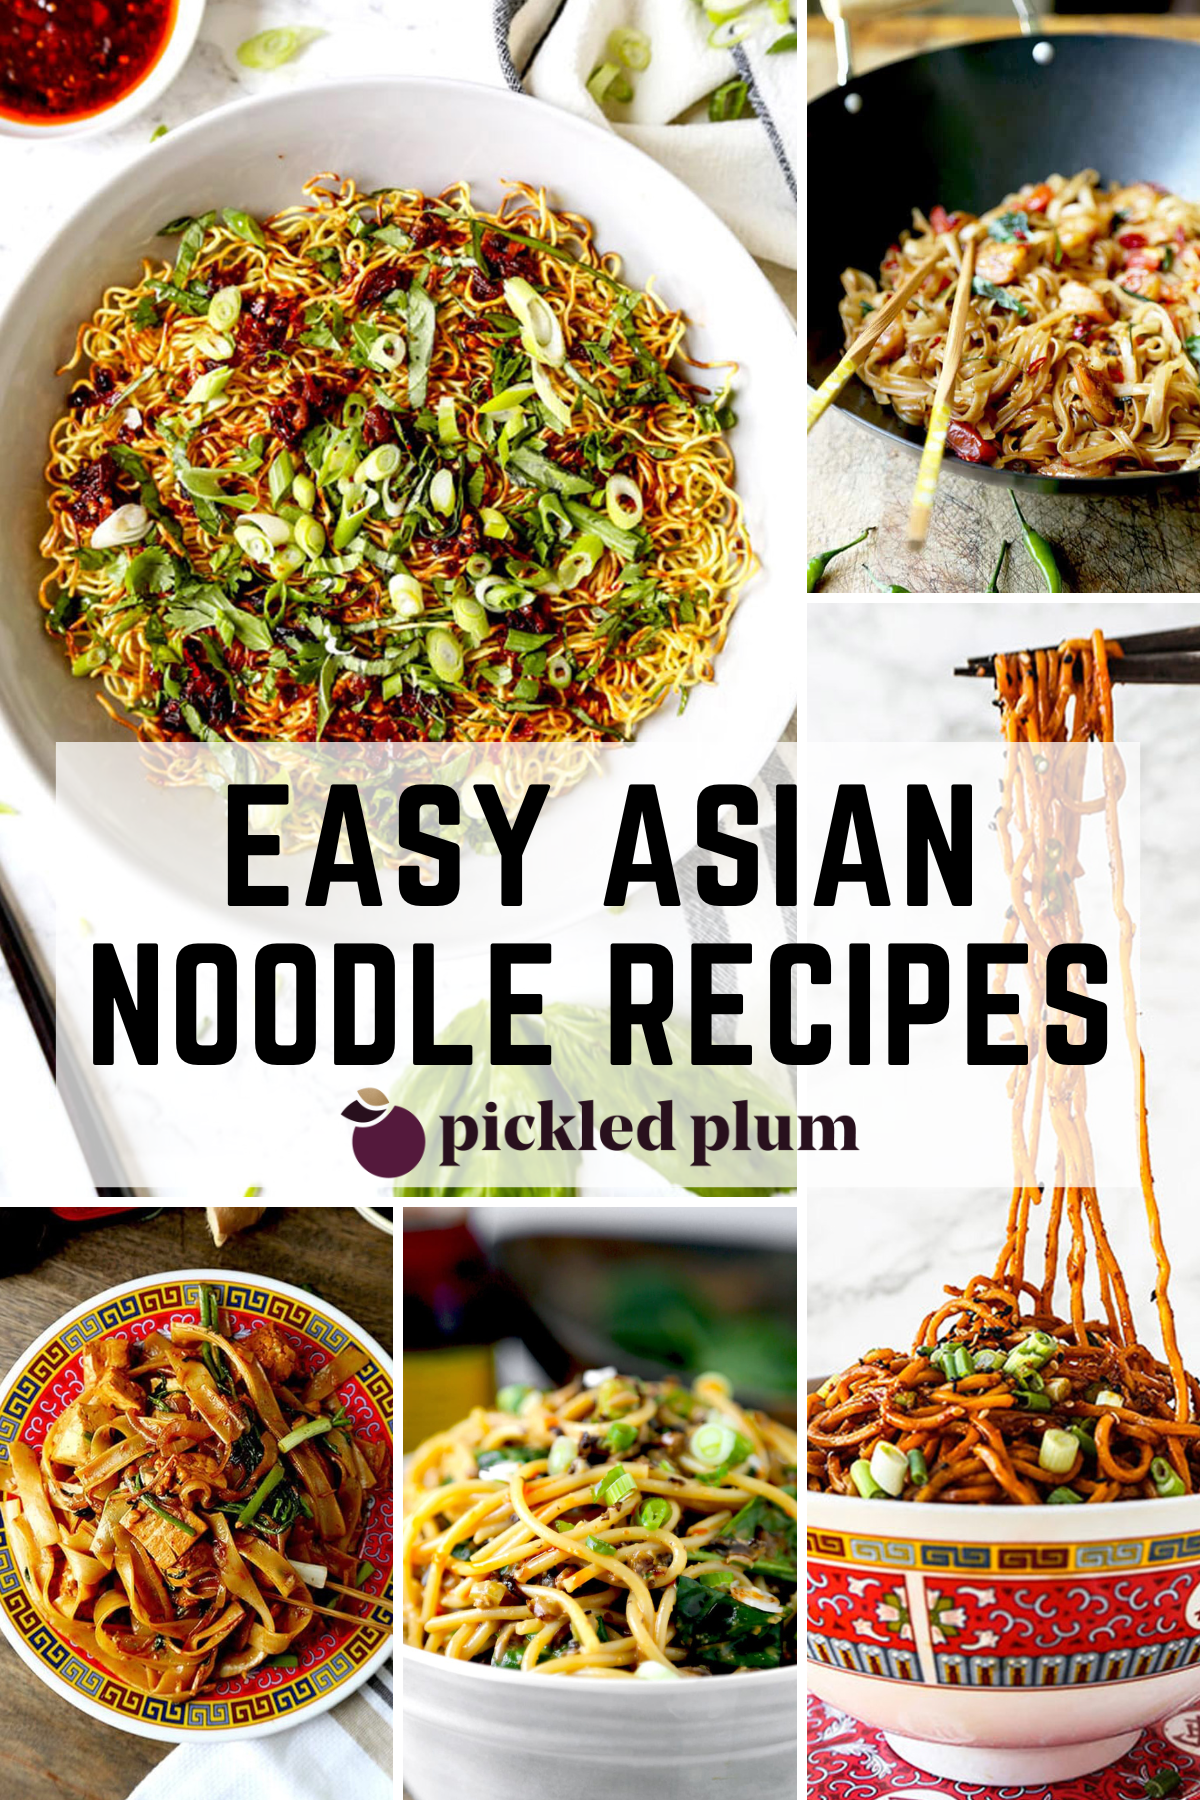 Easy Asian Noodle Recipes